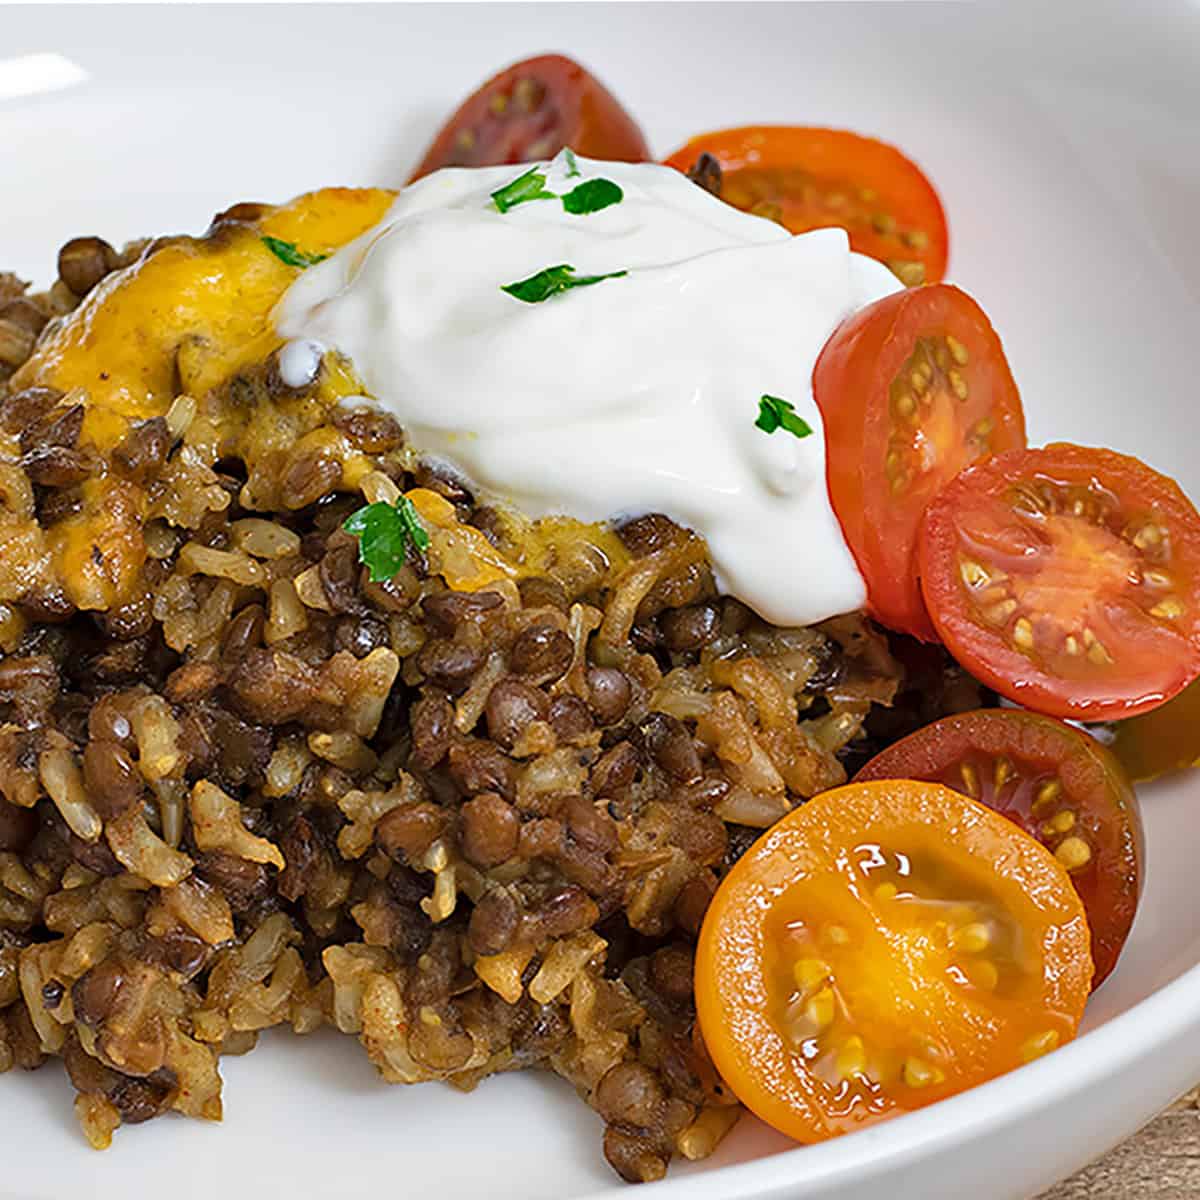 Lentils and Rice Casserole